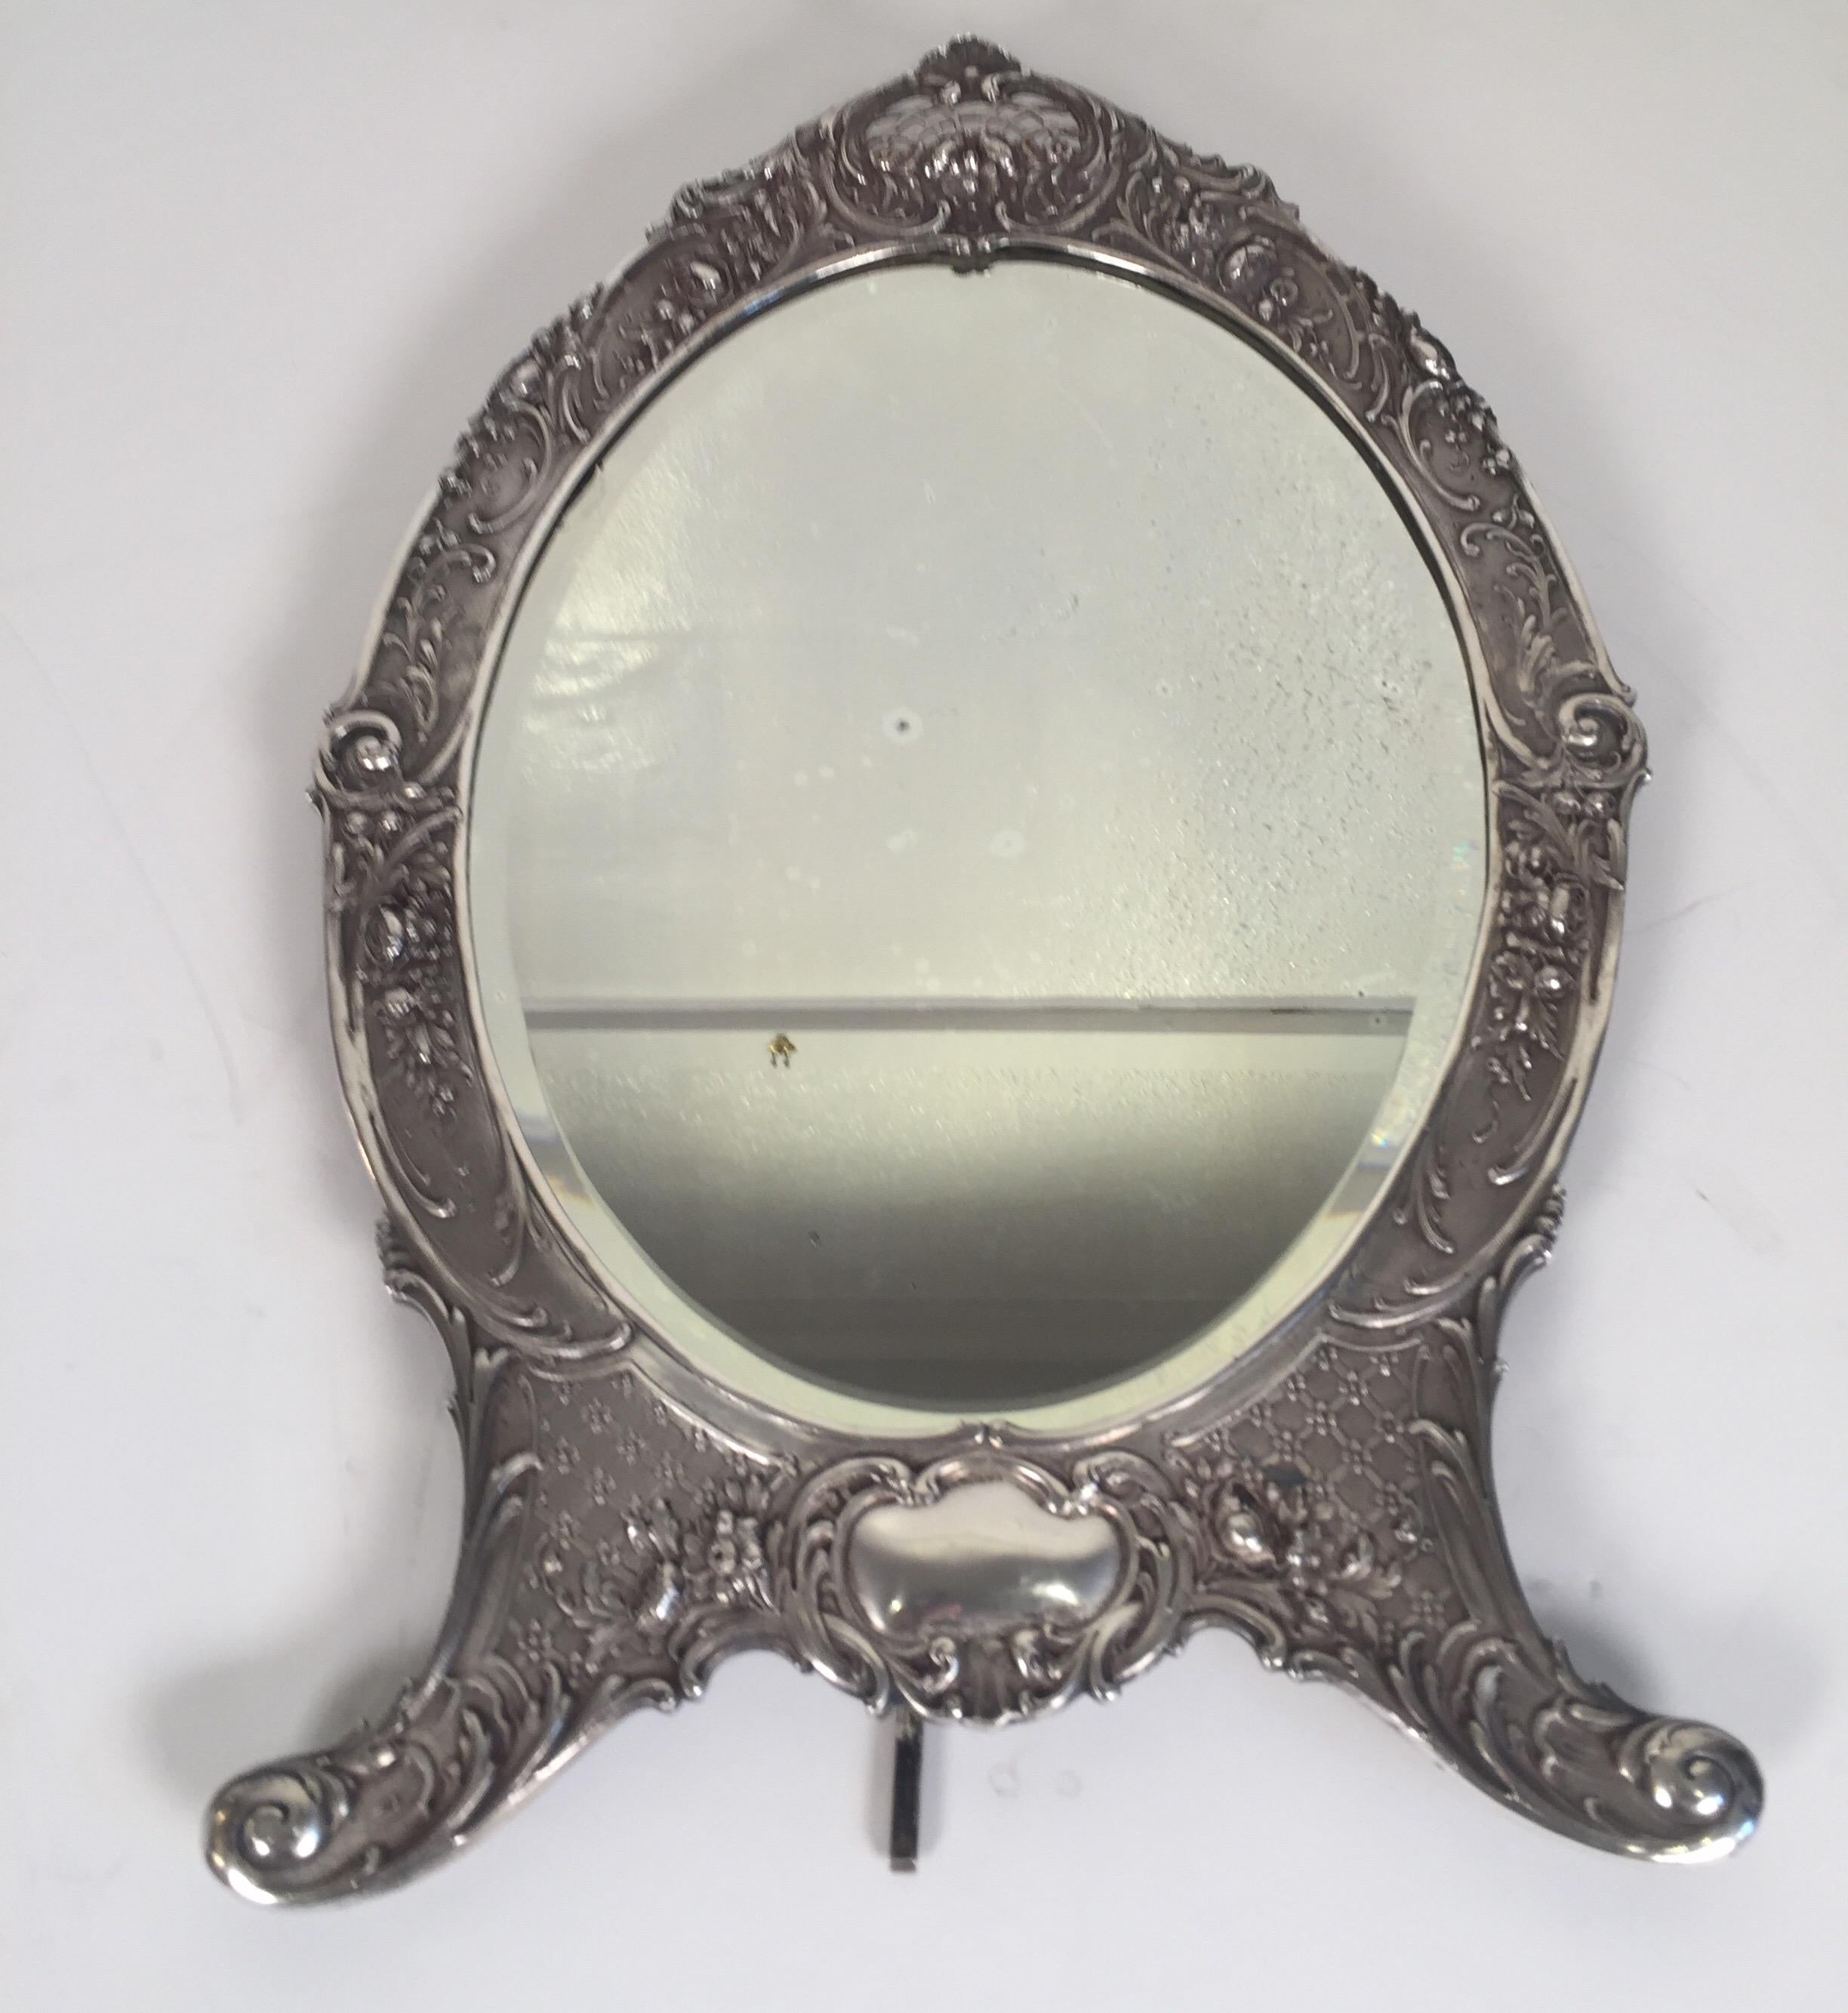 Sterling silver vanity mirror. Made by Tiffany in New York, circa 1900. The oval form with floral and scroll motif all over the frame, the hand beveled oval glass is original. The back with original velvet backing. Marked on the frame with Tiffany